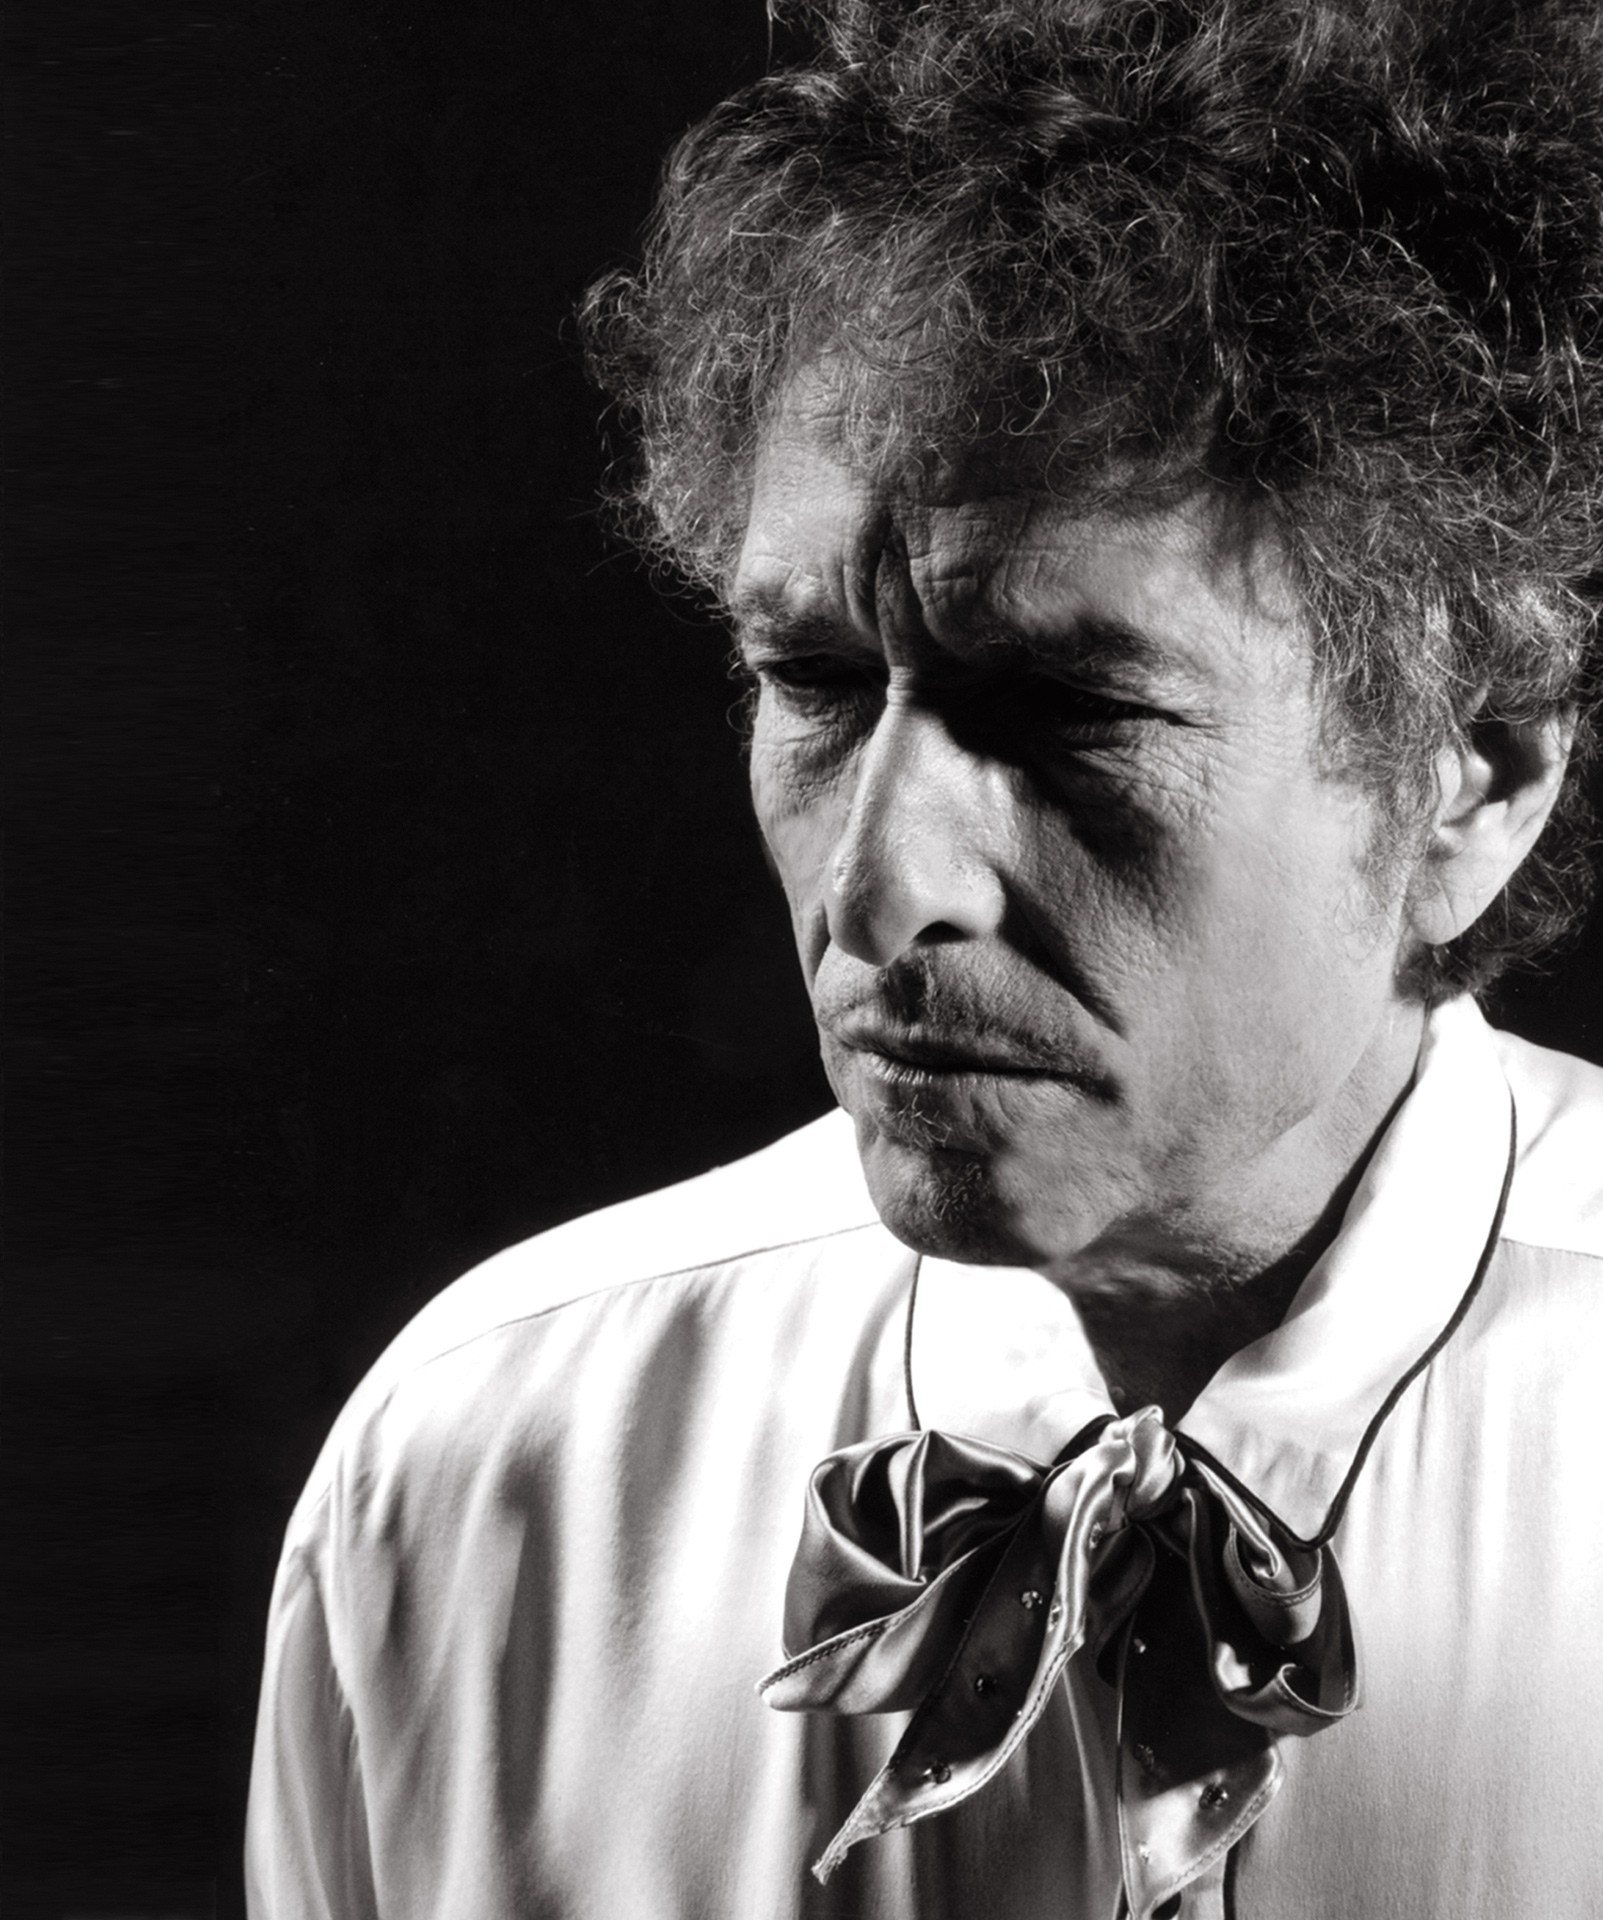 Pondering an age-old question: Is Bob Dylan terrible in concert?, Music  News, Spokane, The Pacific Northwest Inlander